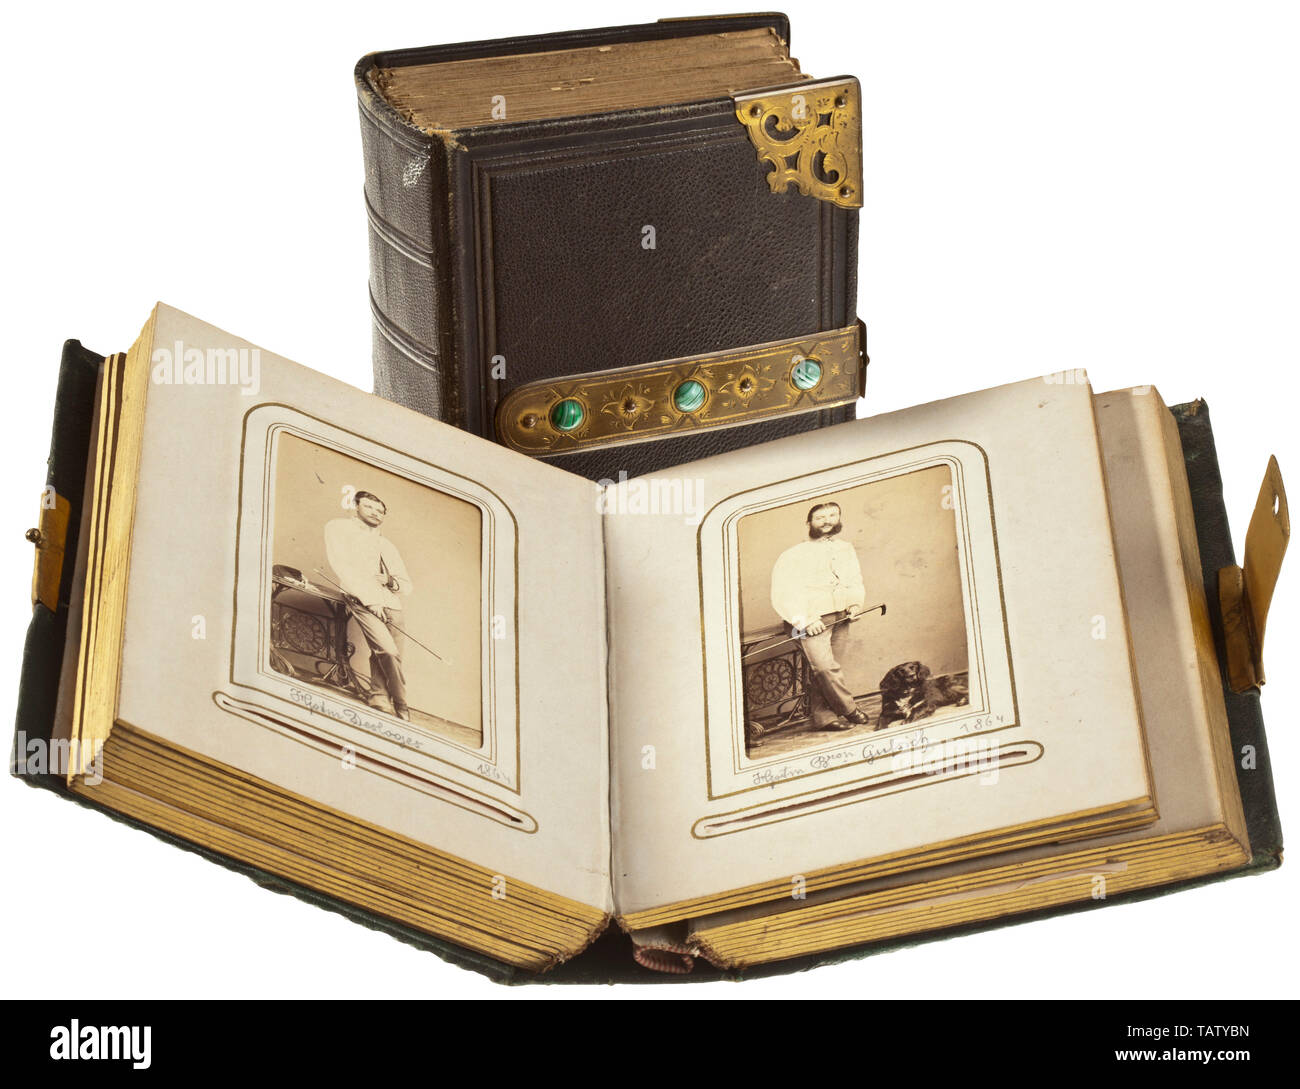 Two photograph albums with carte de visite photographs of the Austrian army  and aristocracy 1864 - 1866, Albums with leather binding, brass fittings  and clasps, pages and cover binding partly loosened or